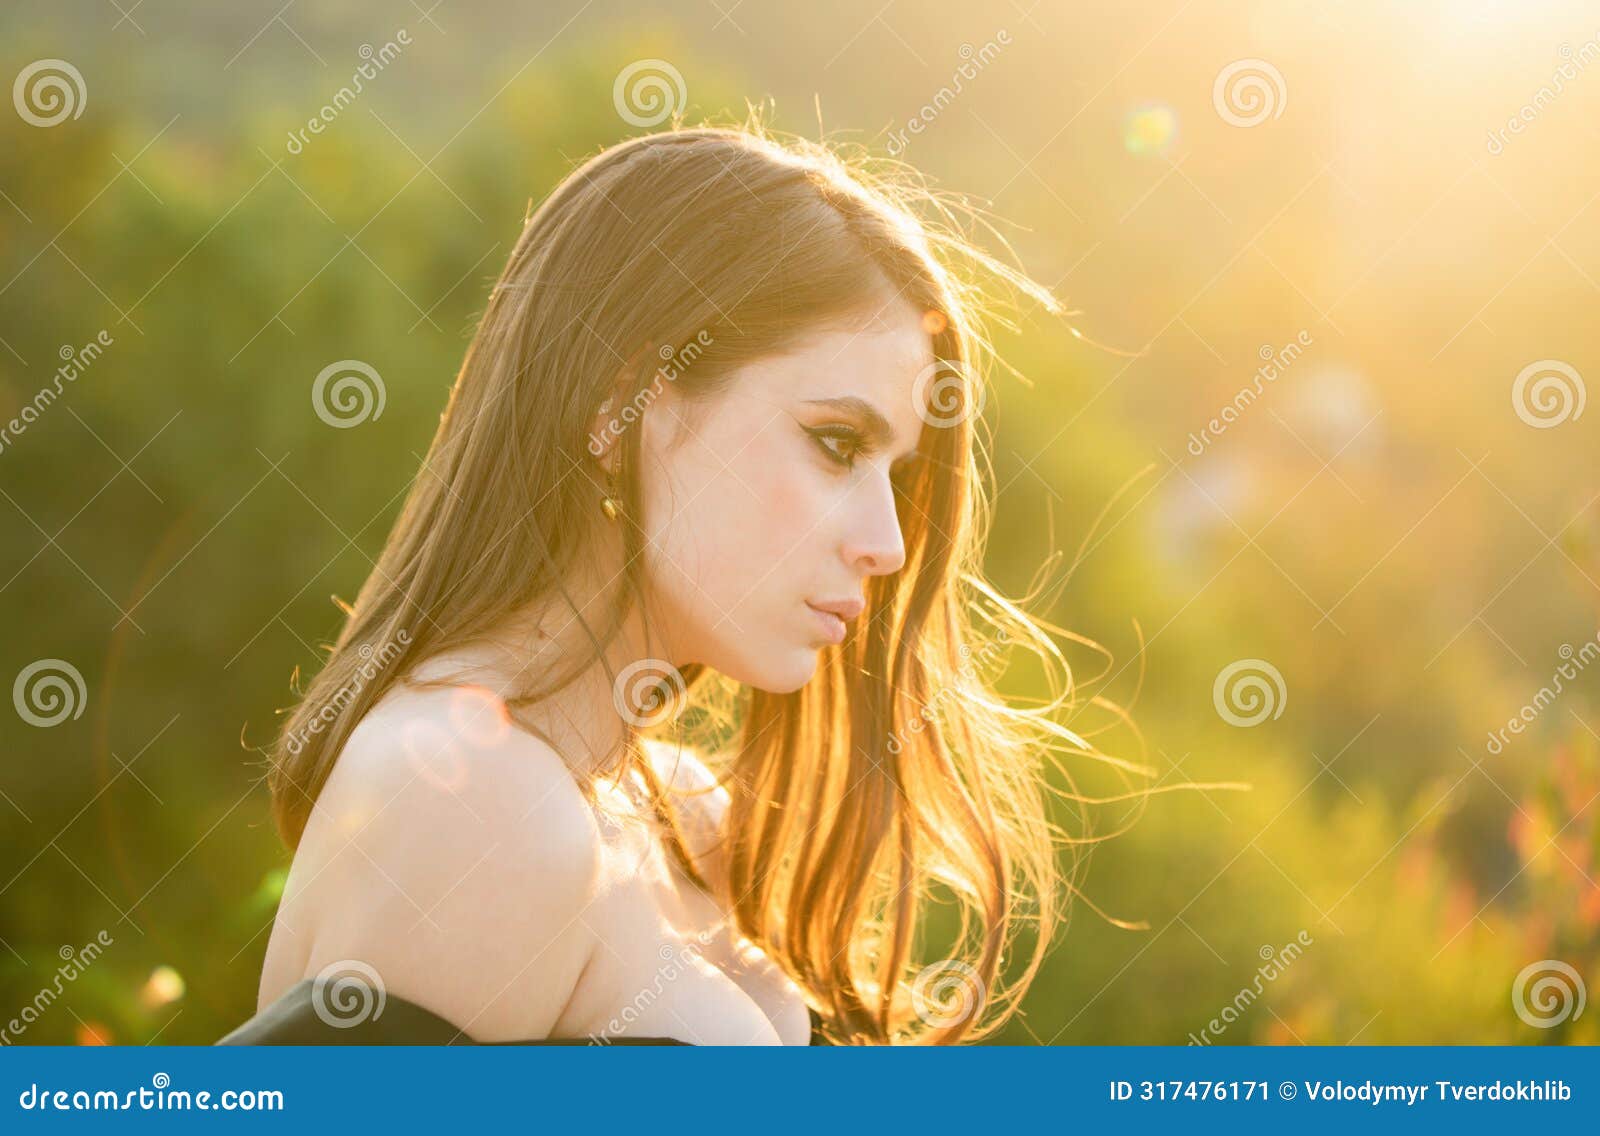 portrait of beautiful young woman looking eways in summer park. outdoor portrait of a cute girl. happy cheerful female